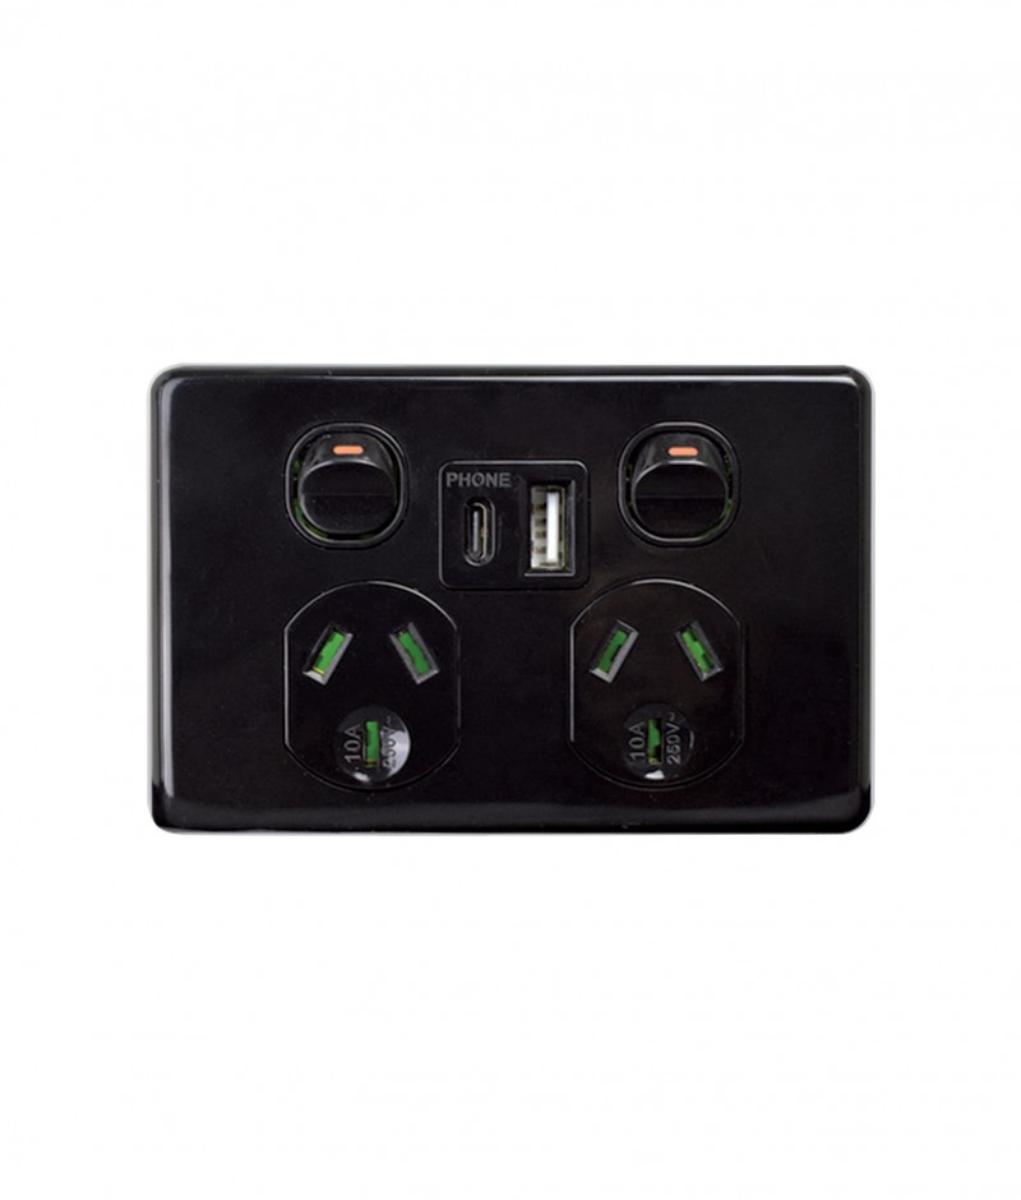 DUAL USB CHARGER P/POINT 5V1.7A/3.4A BLK